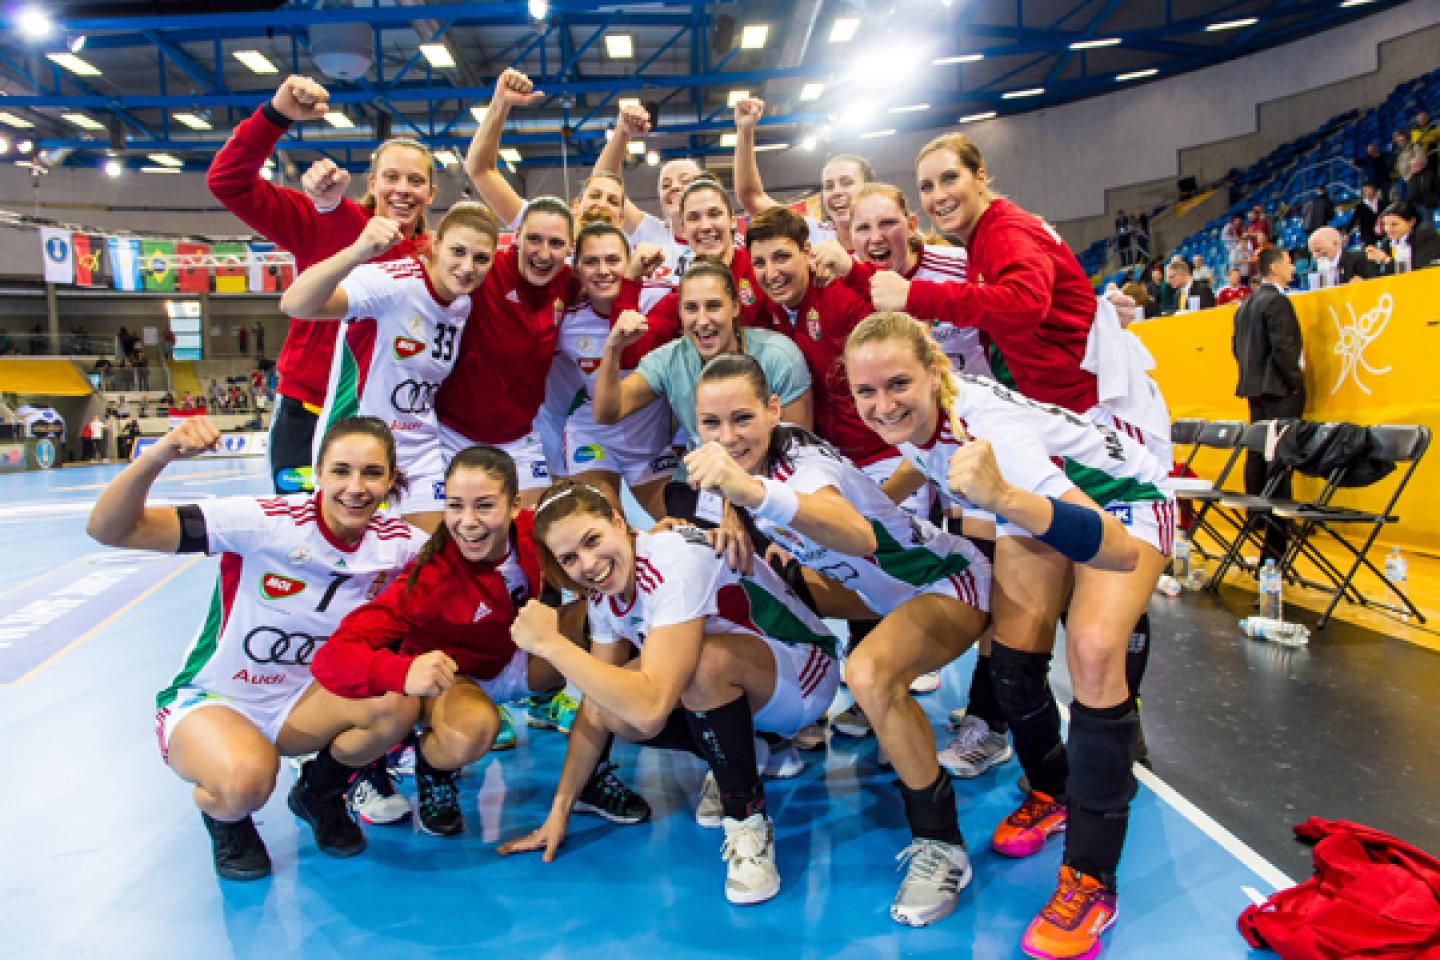 Group B: Polish tears, Czech and Hungarian cheers in Bietigheim-Bissingen